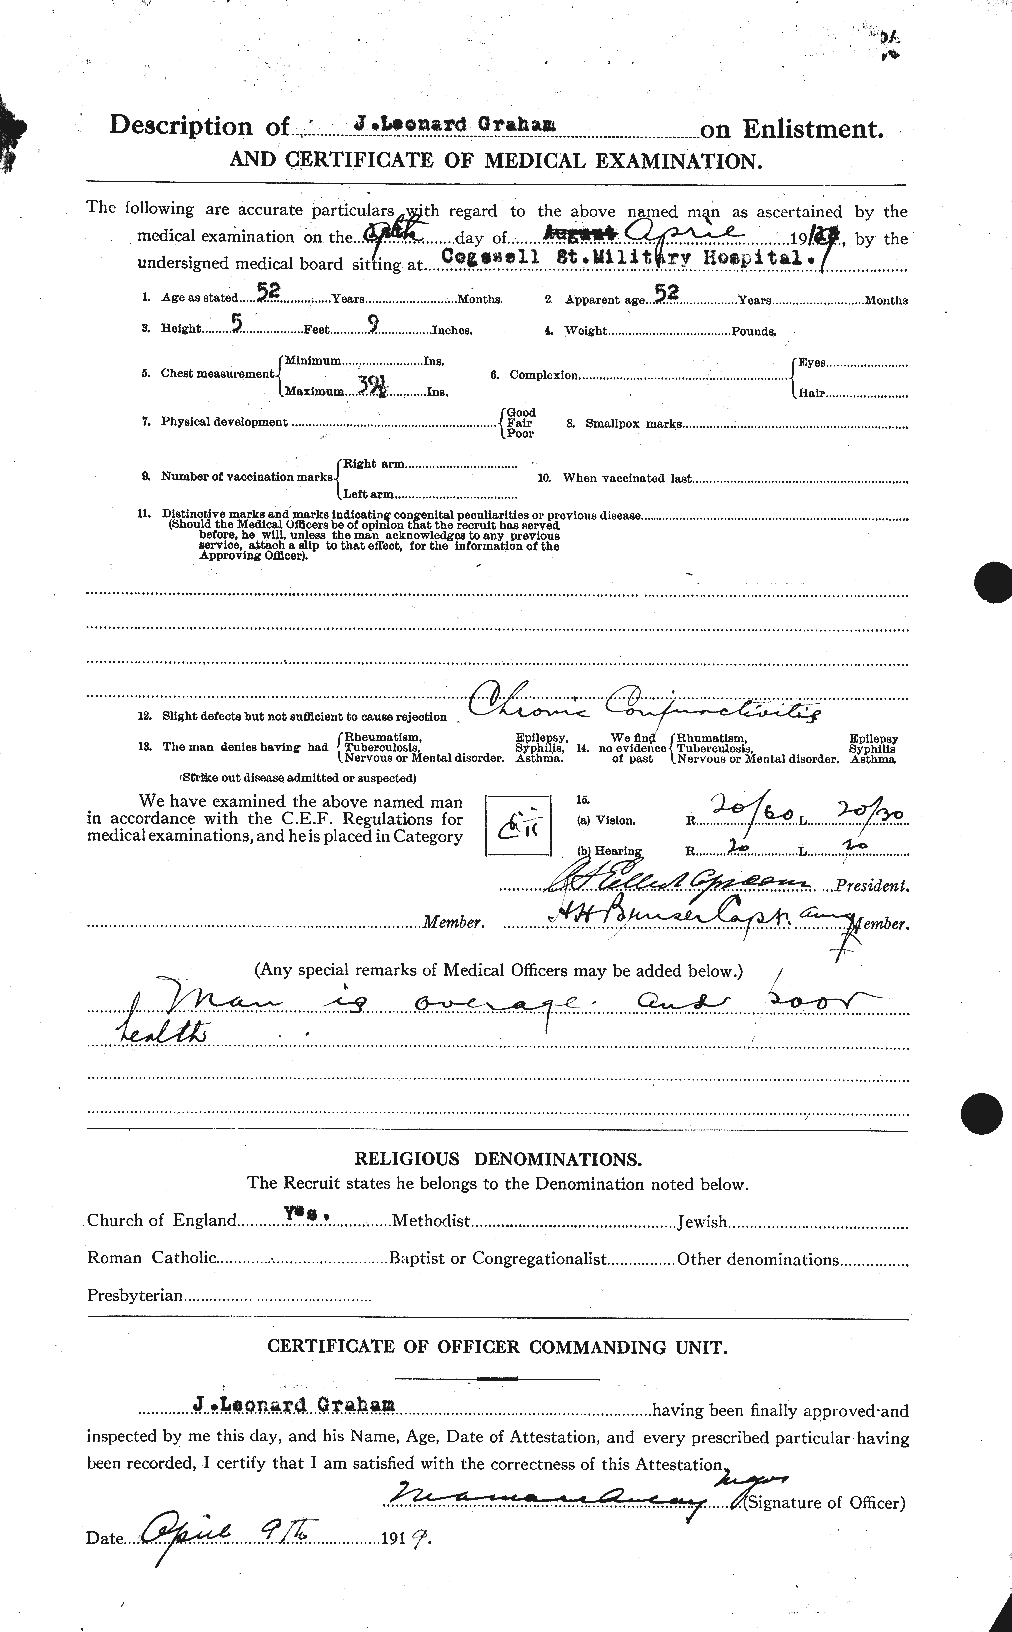 Personnel Records of the First World War - CEF 357770b